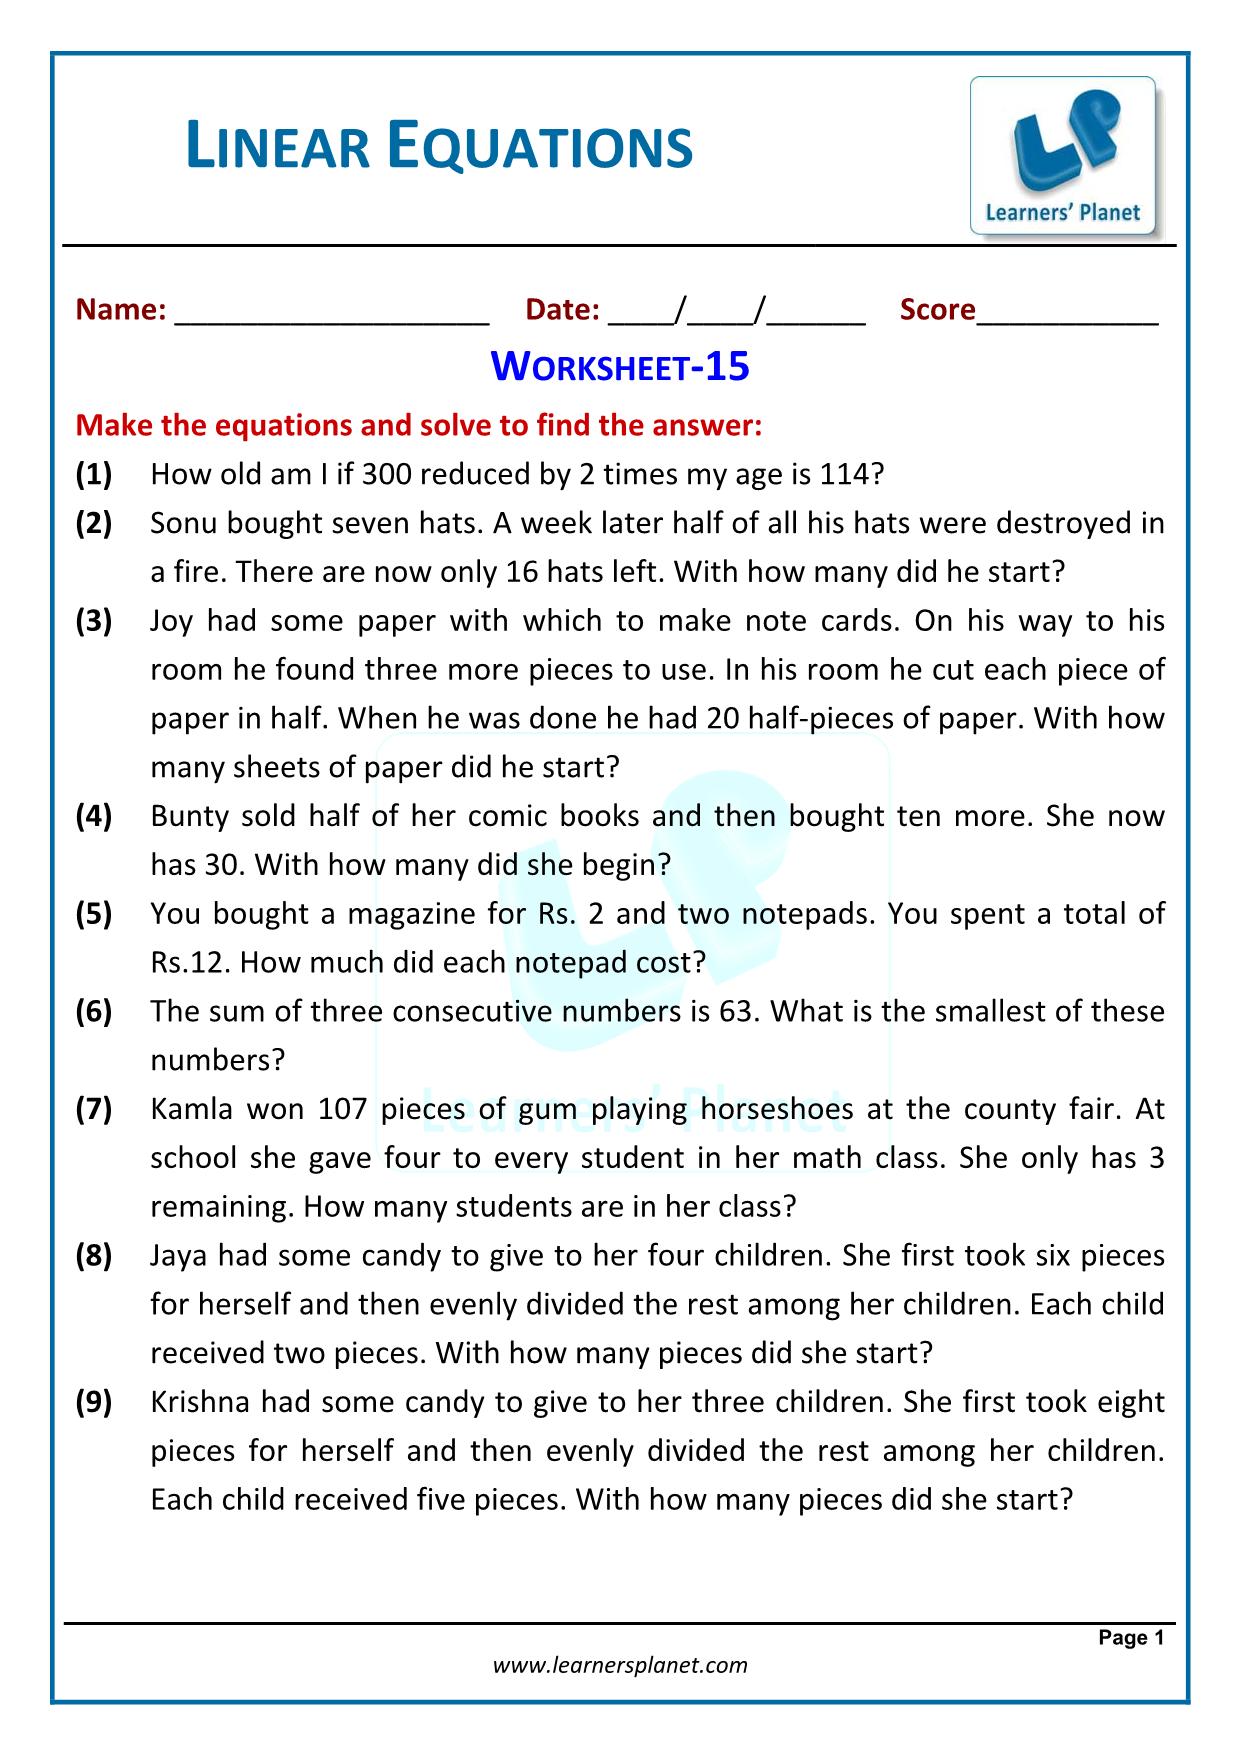 Linear equation word problems worksheet with answer Throughout Linear Word Problems Worksheet